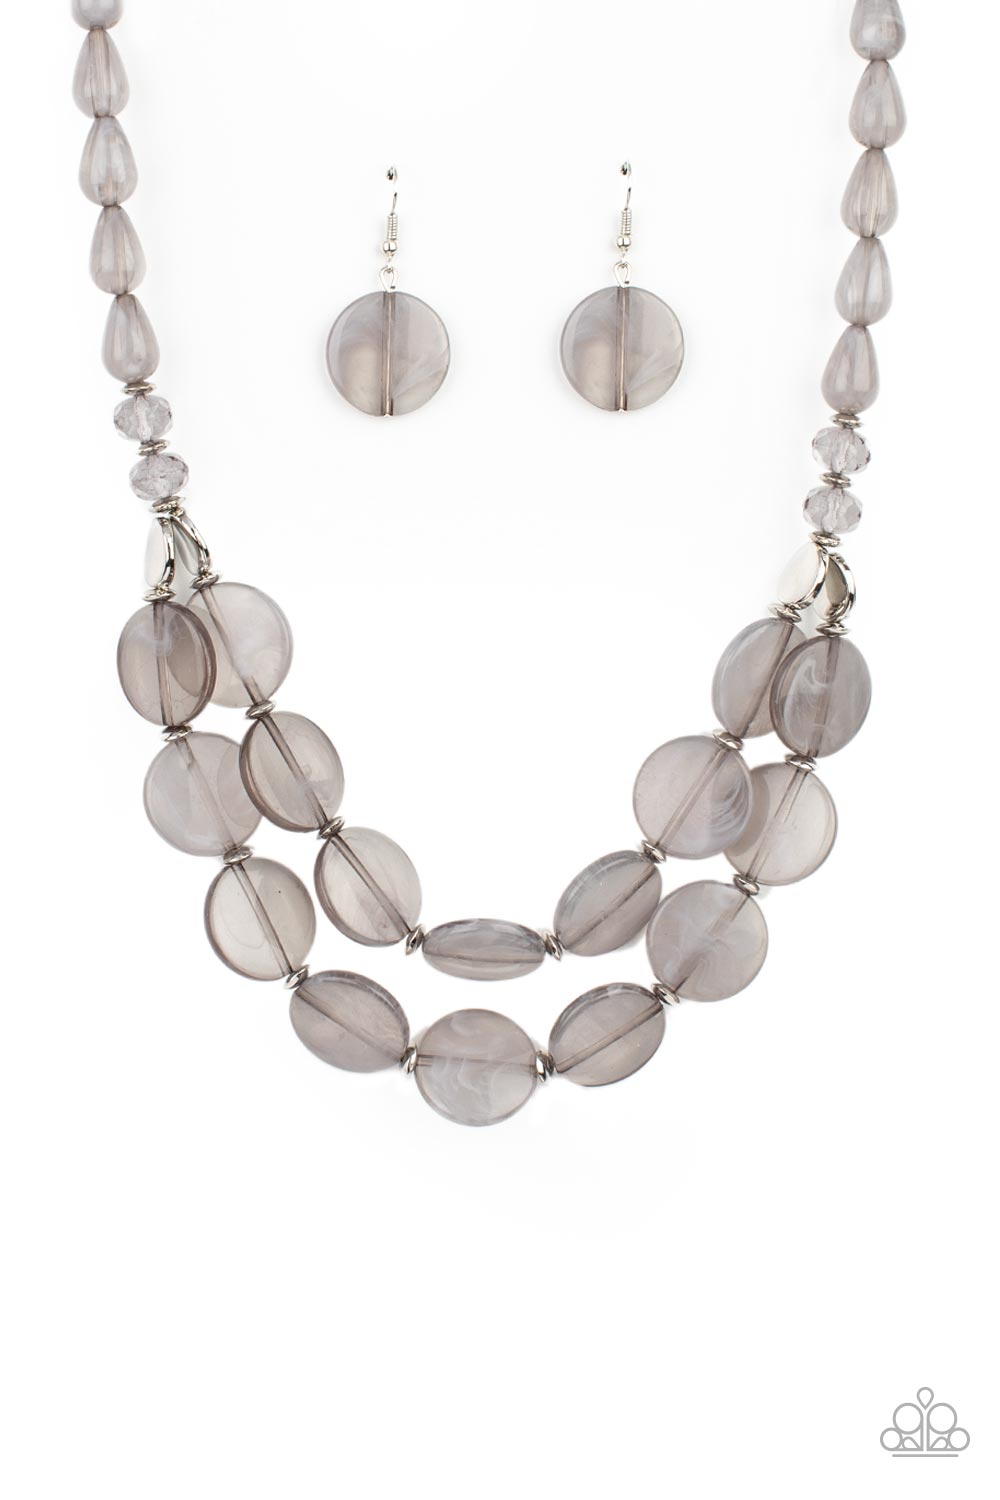 Beach Day Demure Silver Necklace - Paparazzi Accessories  Intermixed with smoky crystal-like beads and shiny silver accents, mismatched cloudy, glassy, and opaque gray teardrop and disc beads layer below the collar for a classic pop of neutral color. Features an adjustable clasp closure.  Sold as one individual necklace. Includes one pair of matching earrings.